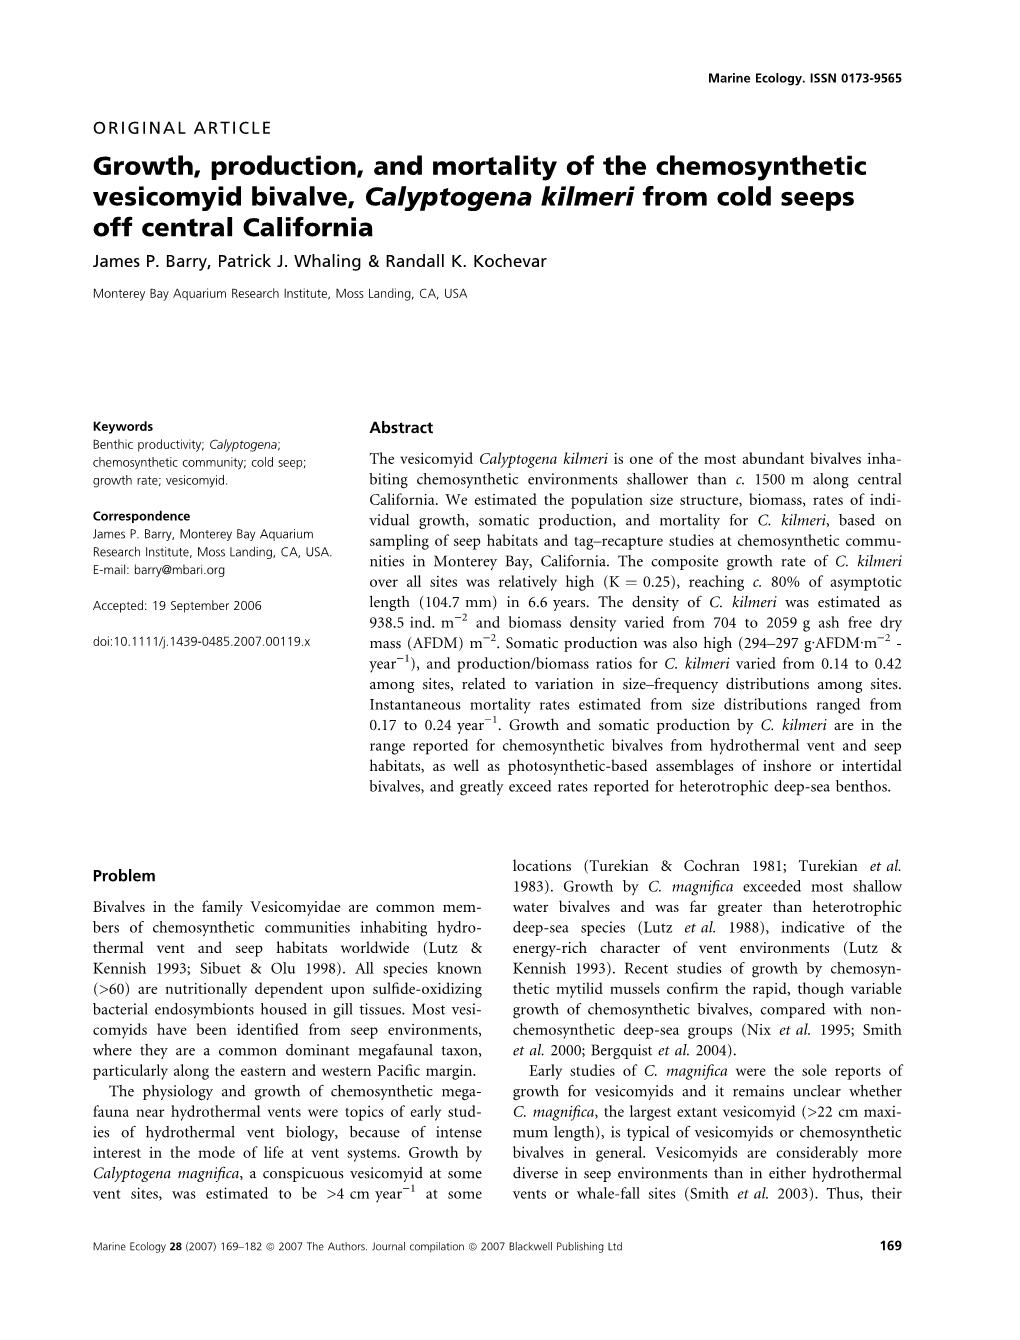 Growth, Production, and Mortality of the Chemosynthetic Vesicomyid Bivalve, Calyptogena Kilmeri from Cold Seeps Off Central California James P